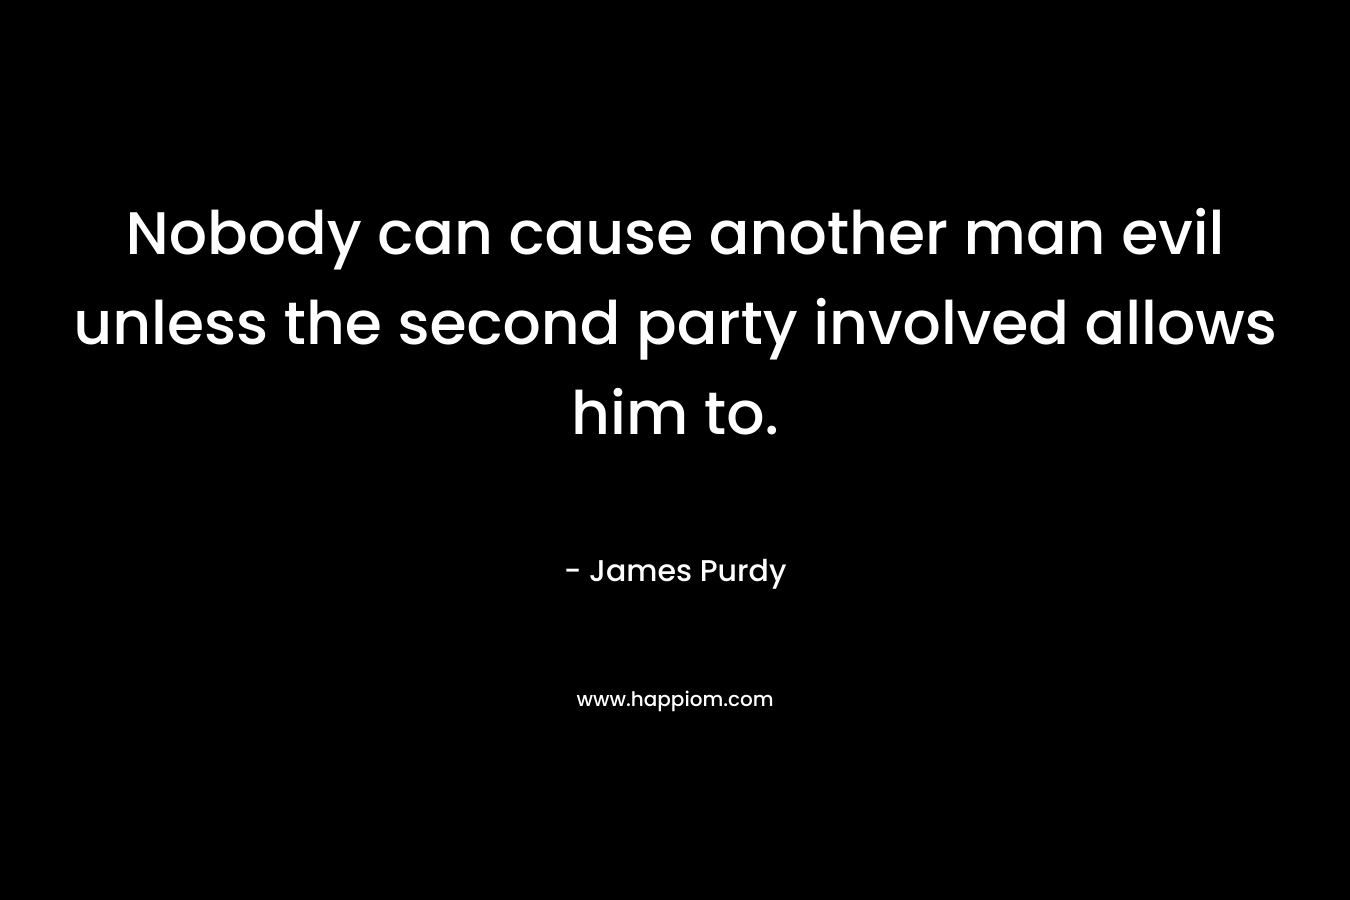 Nobody can cause another man evil unless the second party involved allows him to.